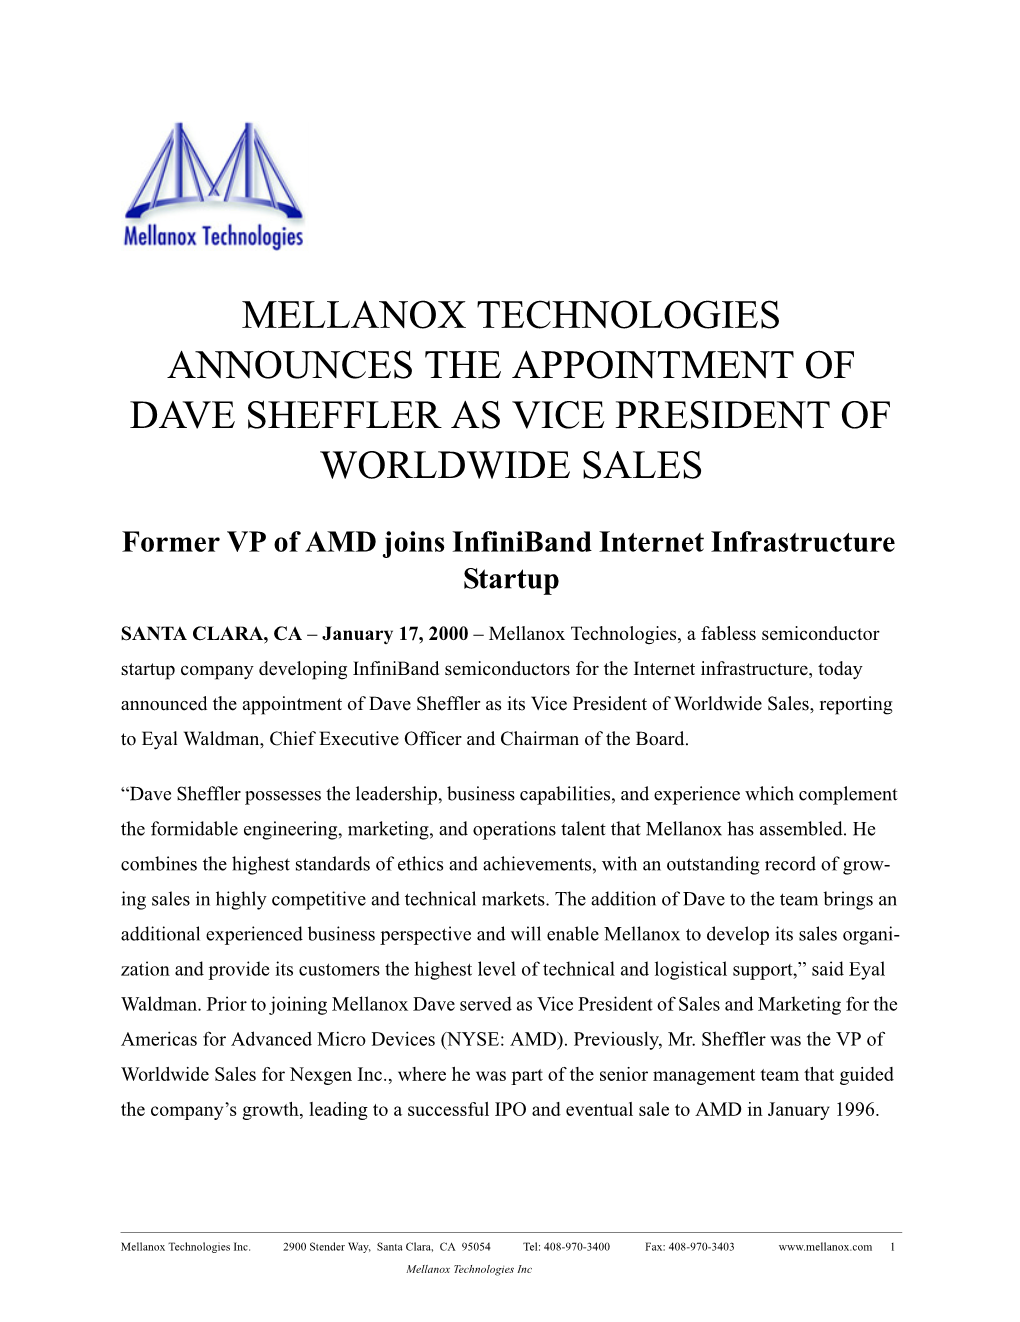 Mellanox Technologies Announces the Appointment of Dave Sheffler As Vice President of Worldwide Sales